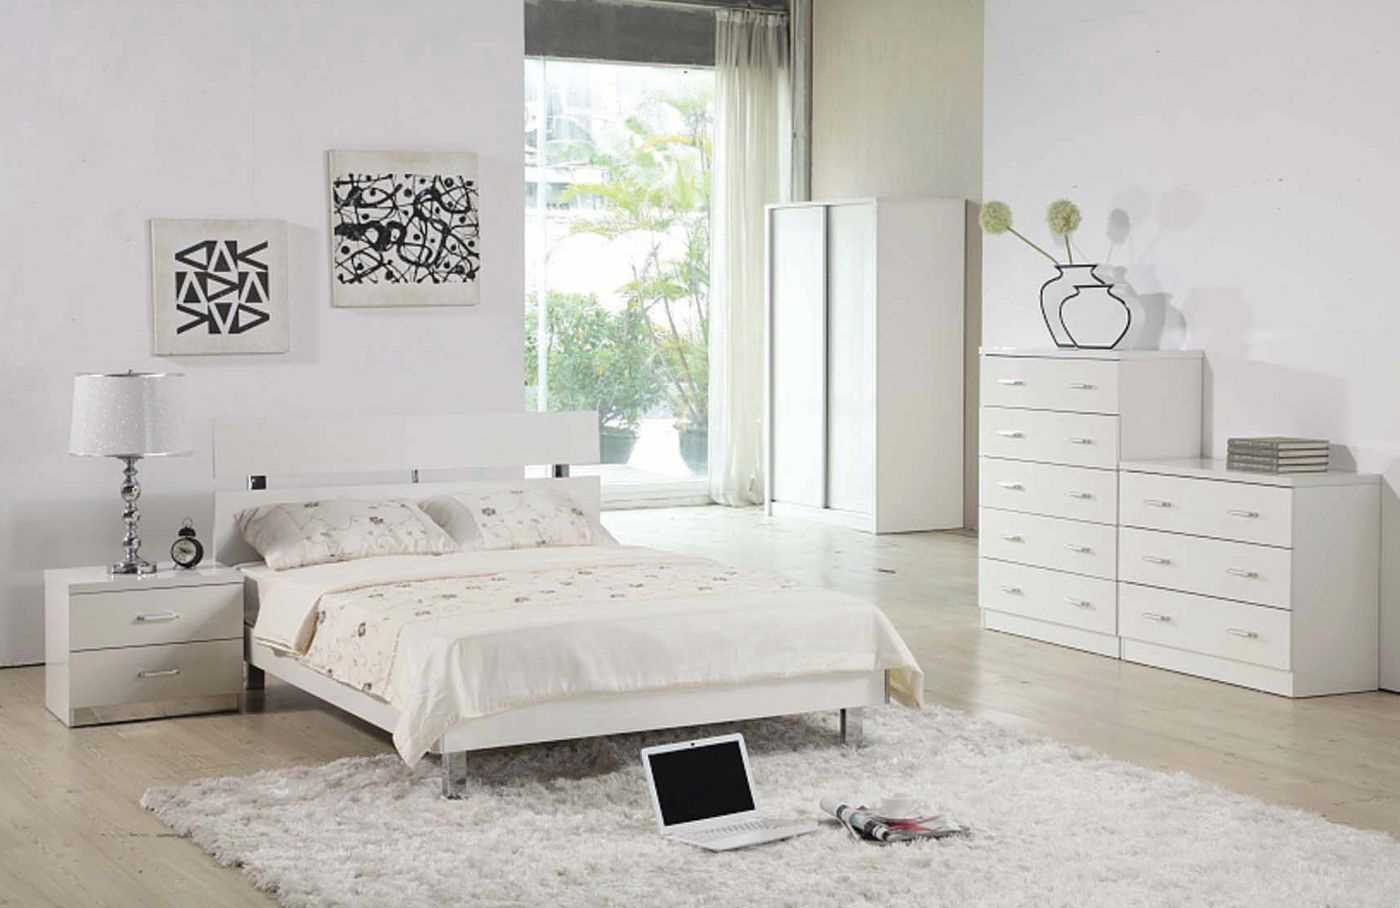 light white furniture in the bedroom interior